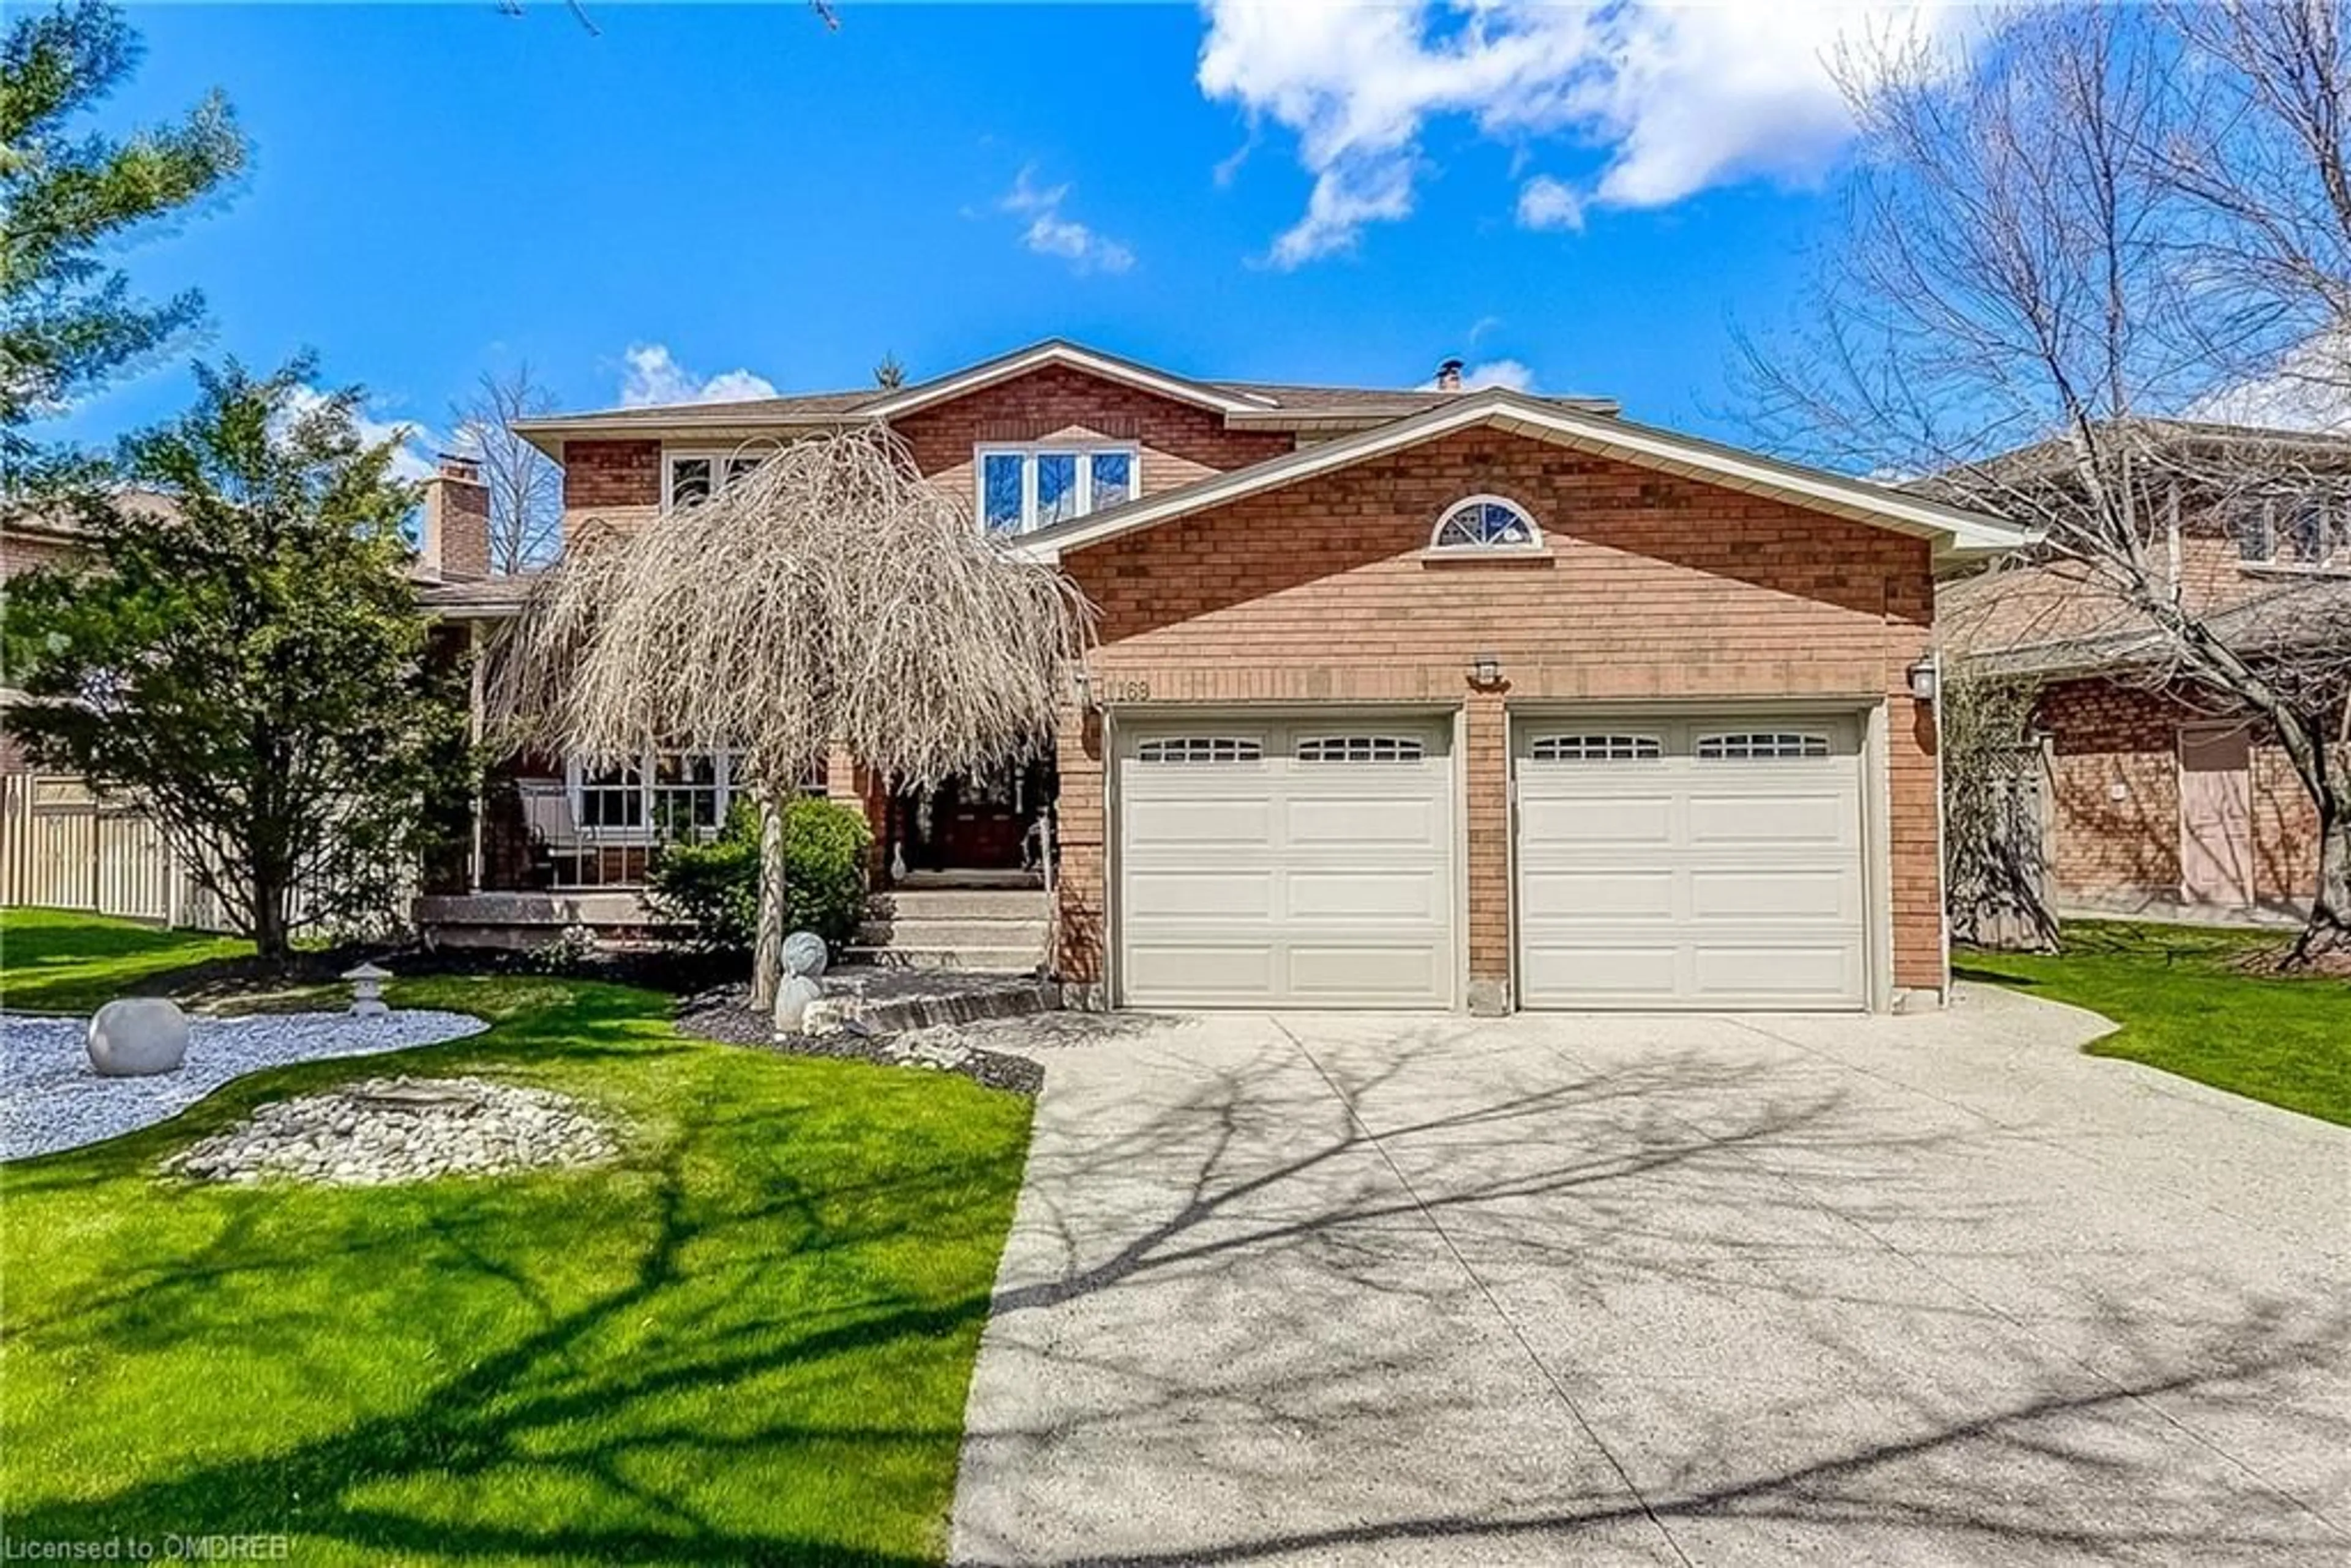 Home with brick exterior material for 1169 Beechgrove Cres, Oakville Ontario L6M 2B3